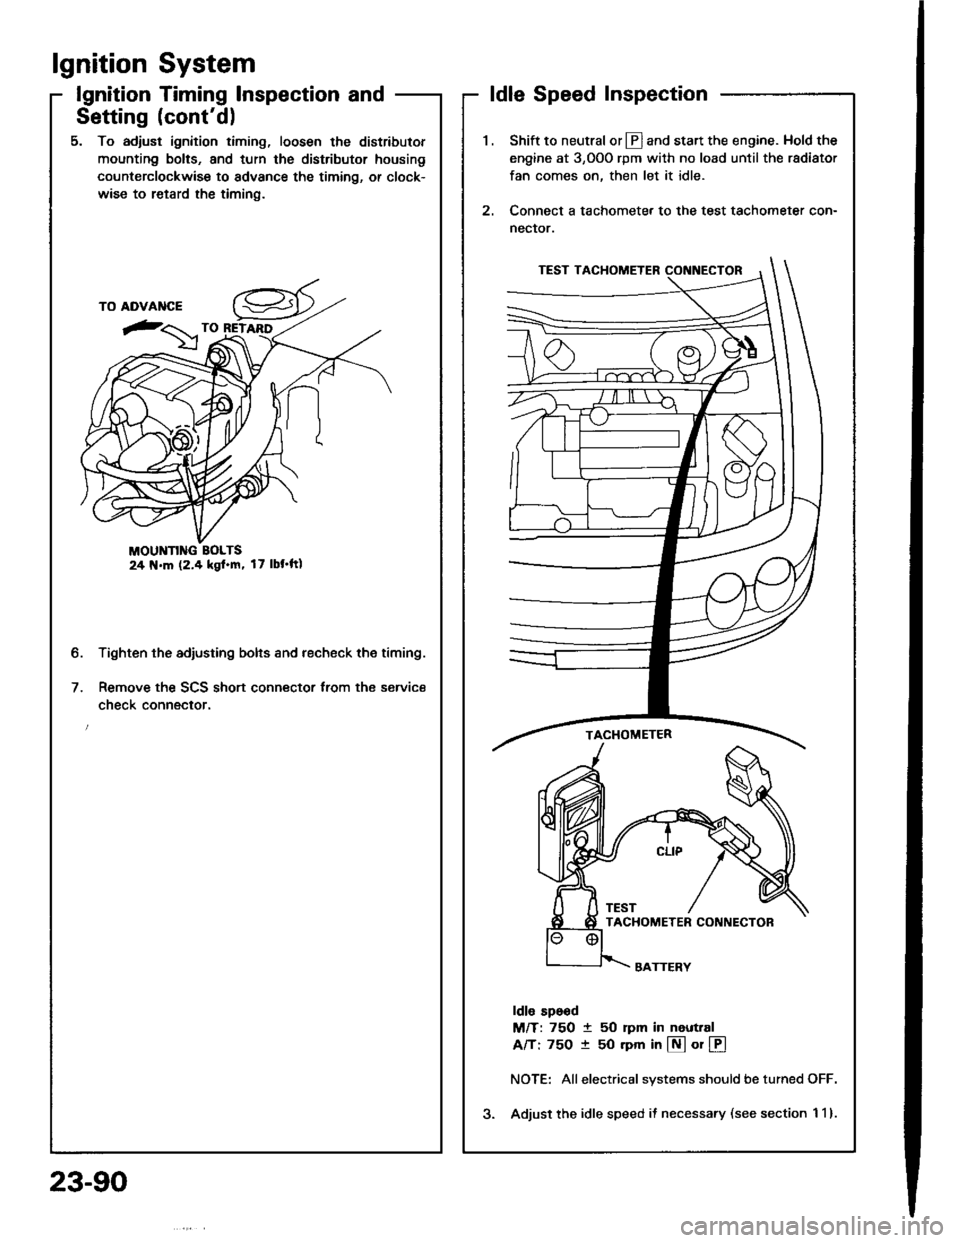 HONDA INTEGRA 1994 4.G Workshop Manual lgnition System
lgnition Timing lnspection and
Setting (contd)
5. To adjust ignition timing, loosen the distributor
mounting bolts, and turn the distributor housing
counterclockwise to advance the ti